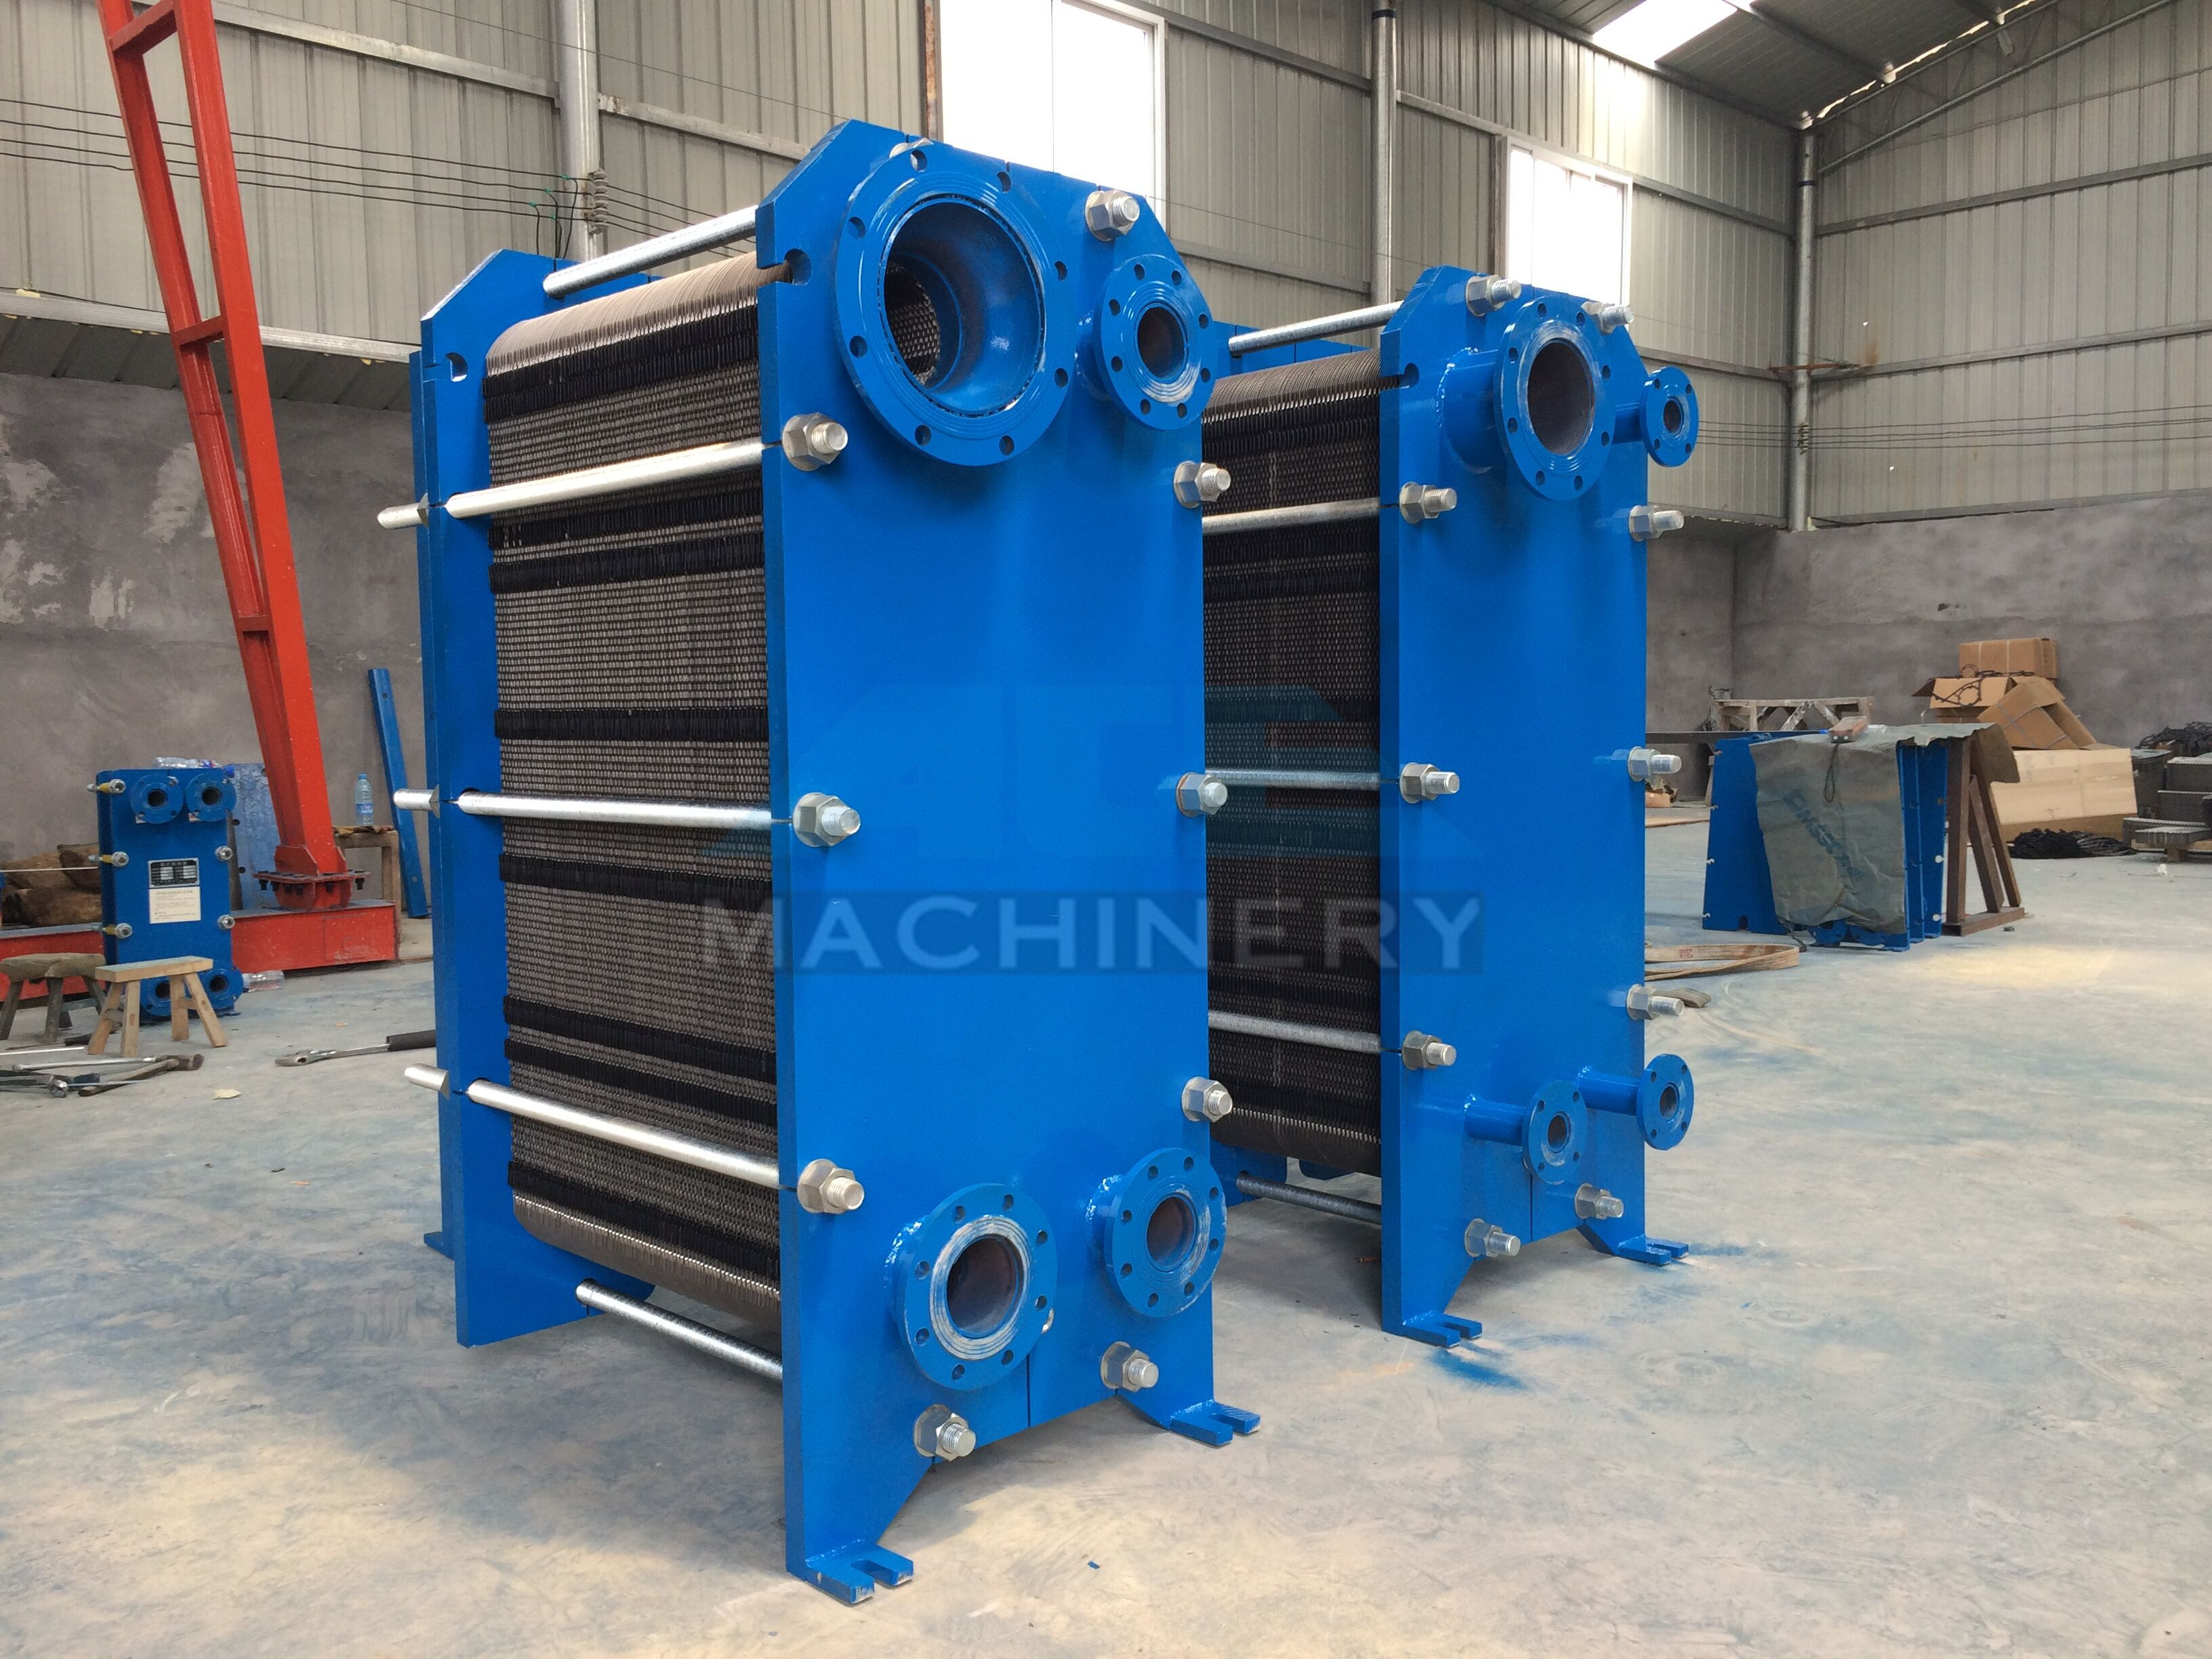 Wholesale Low Price Pool Water Plate Heat Exchanger Manufacturer Smartheat Engines Parts Producer And Supplier from china suppliers